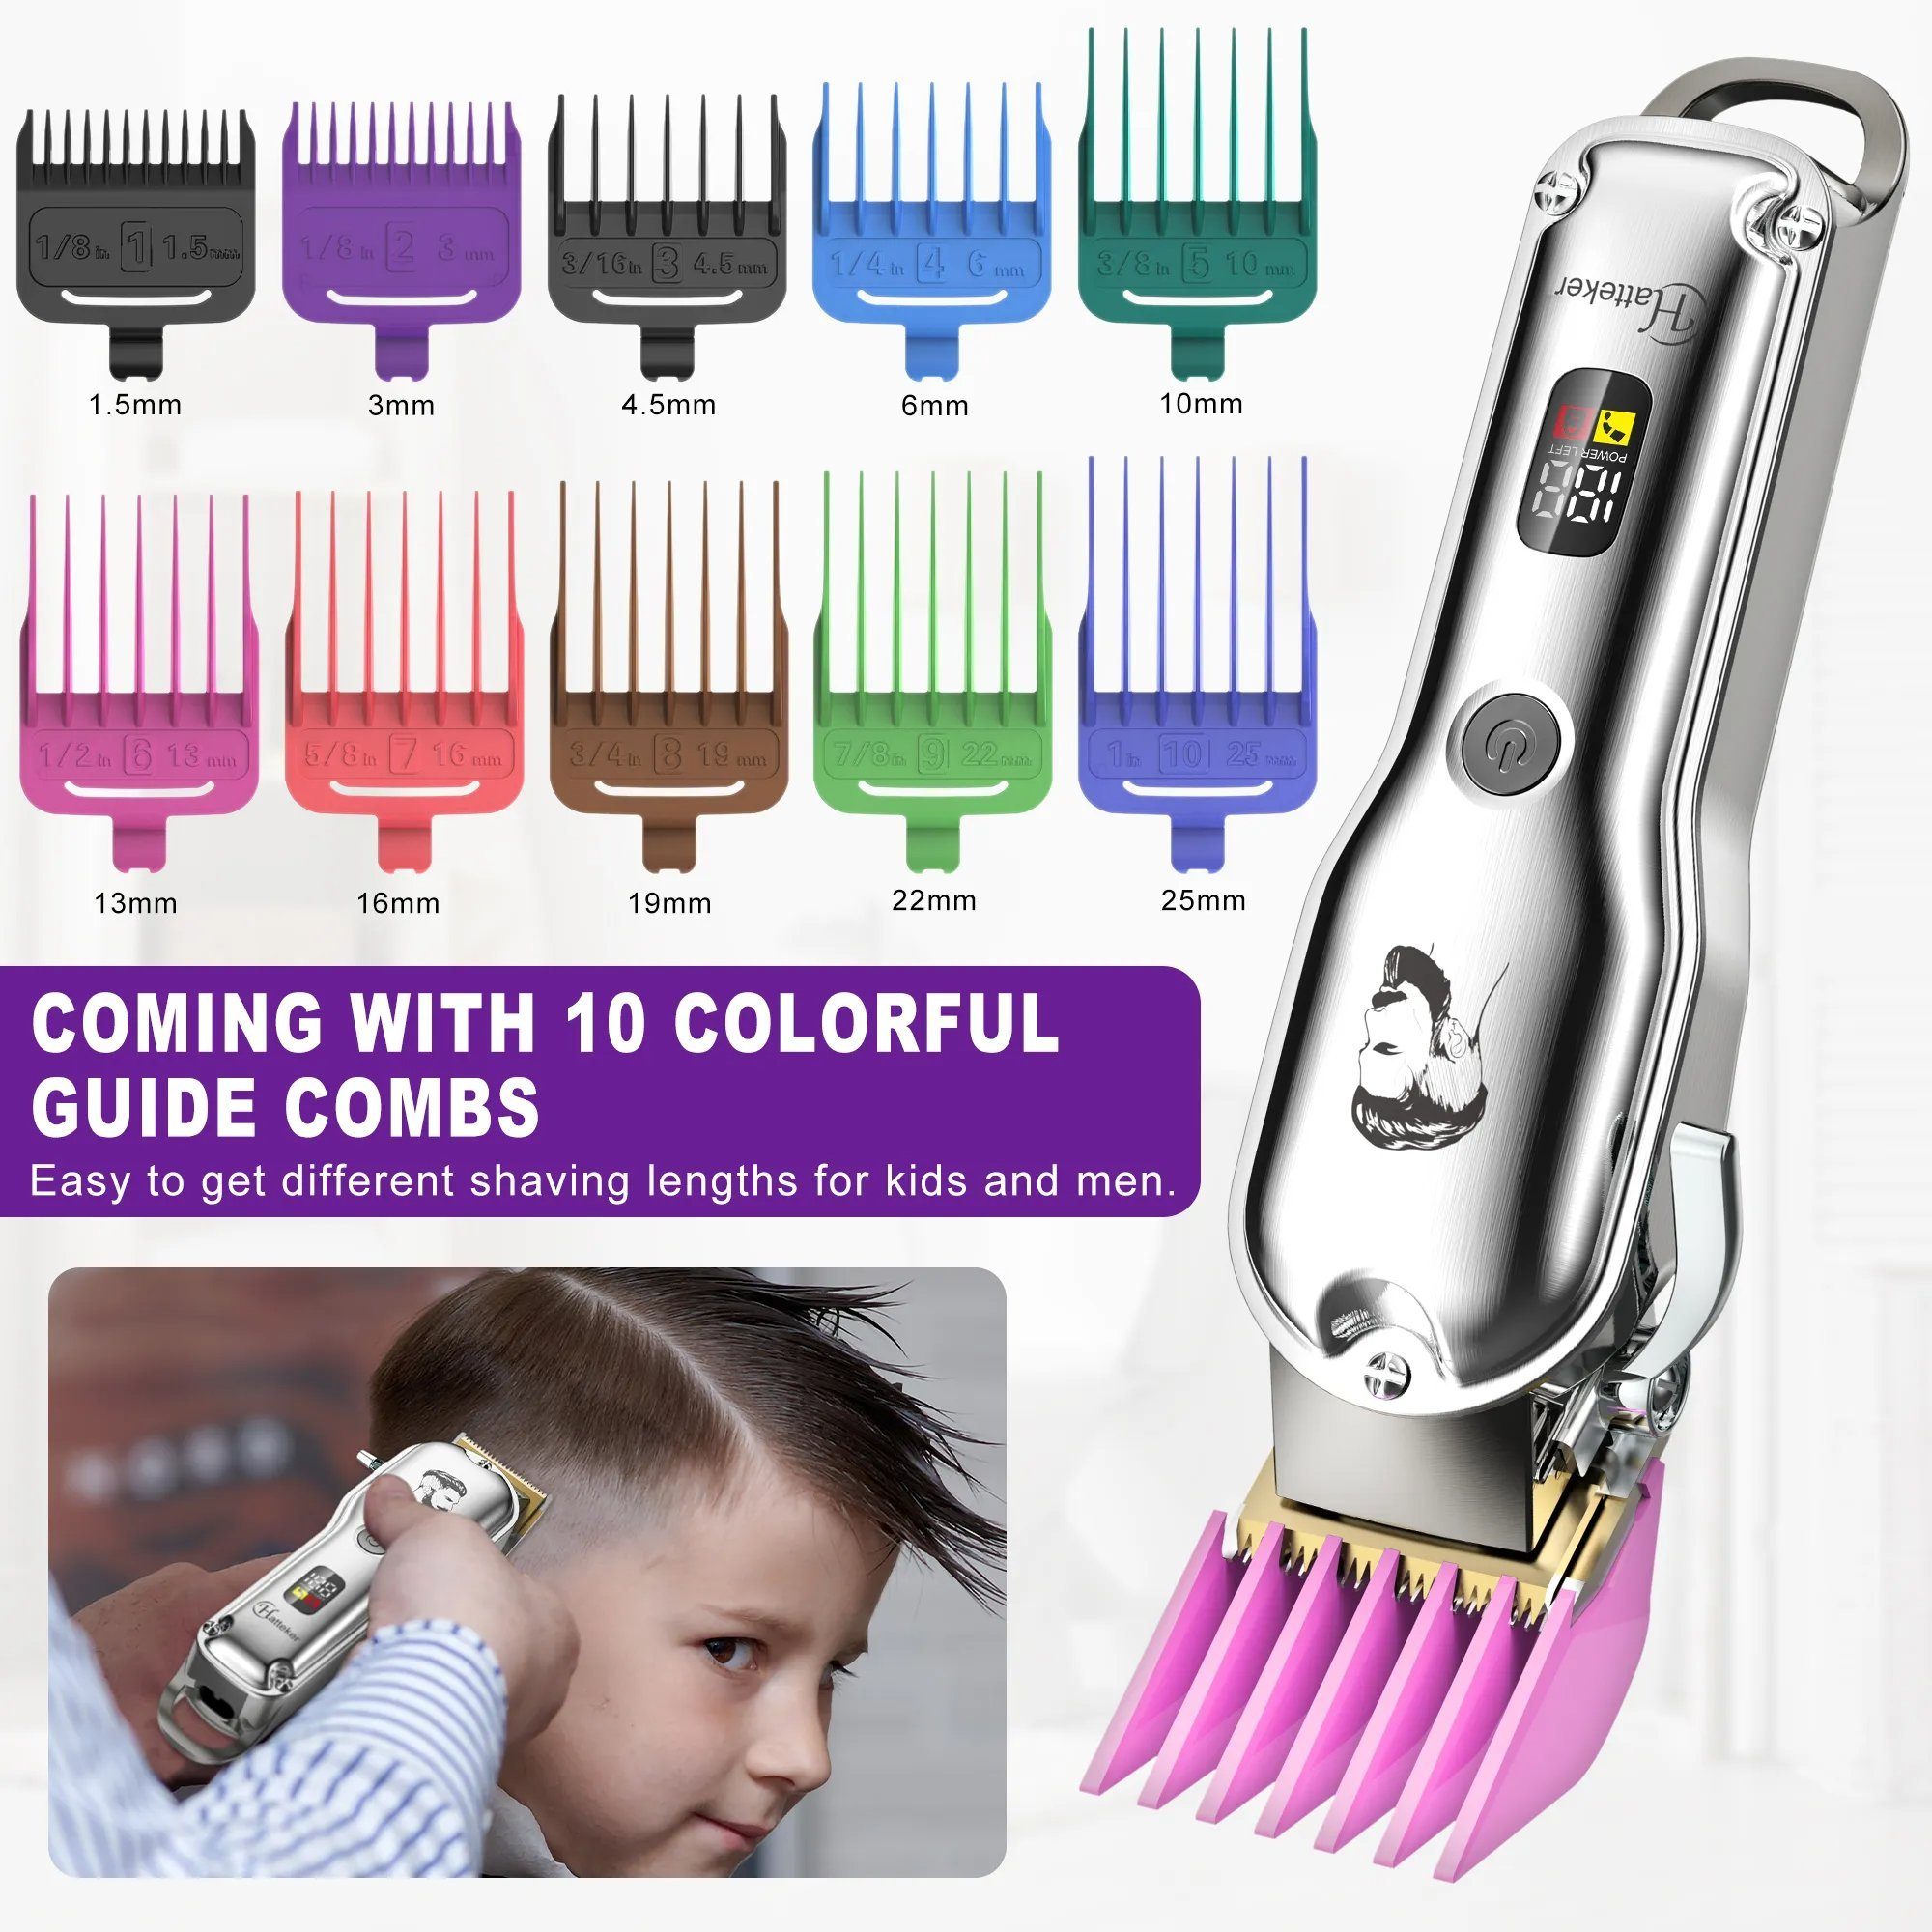 HATTEKER Beauty-Trimmer Hair Professional Grooming Colorful mAh, waschbar Combs Vollständig Kit Barbers Clippers, 2000 Rechargeable